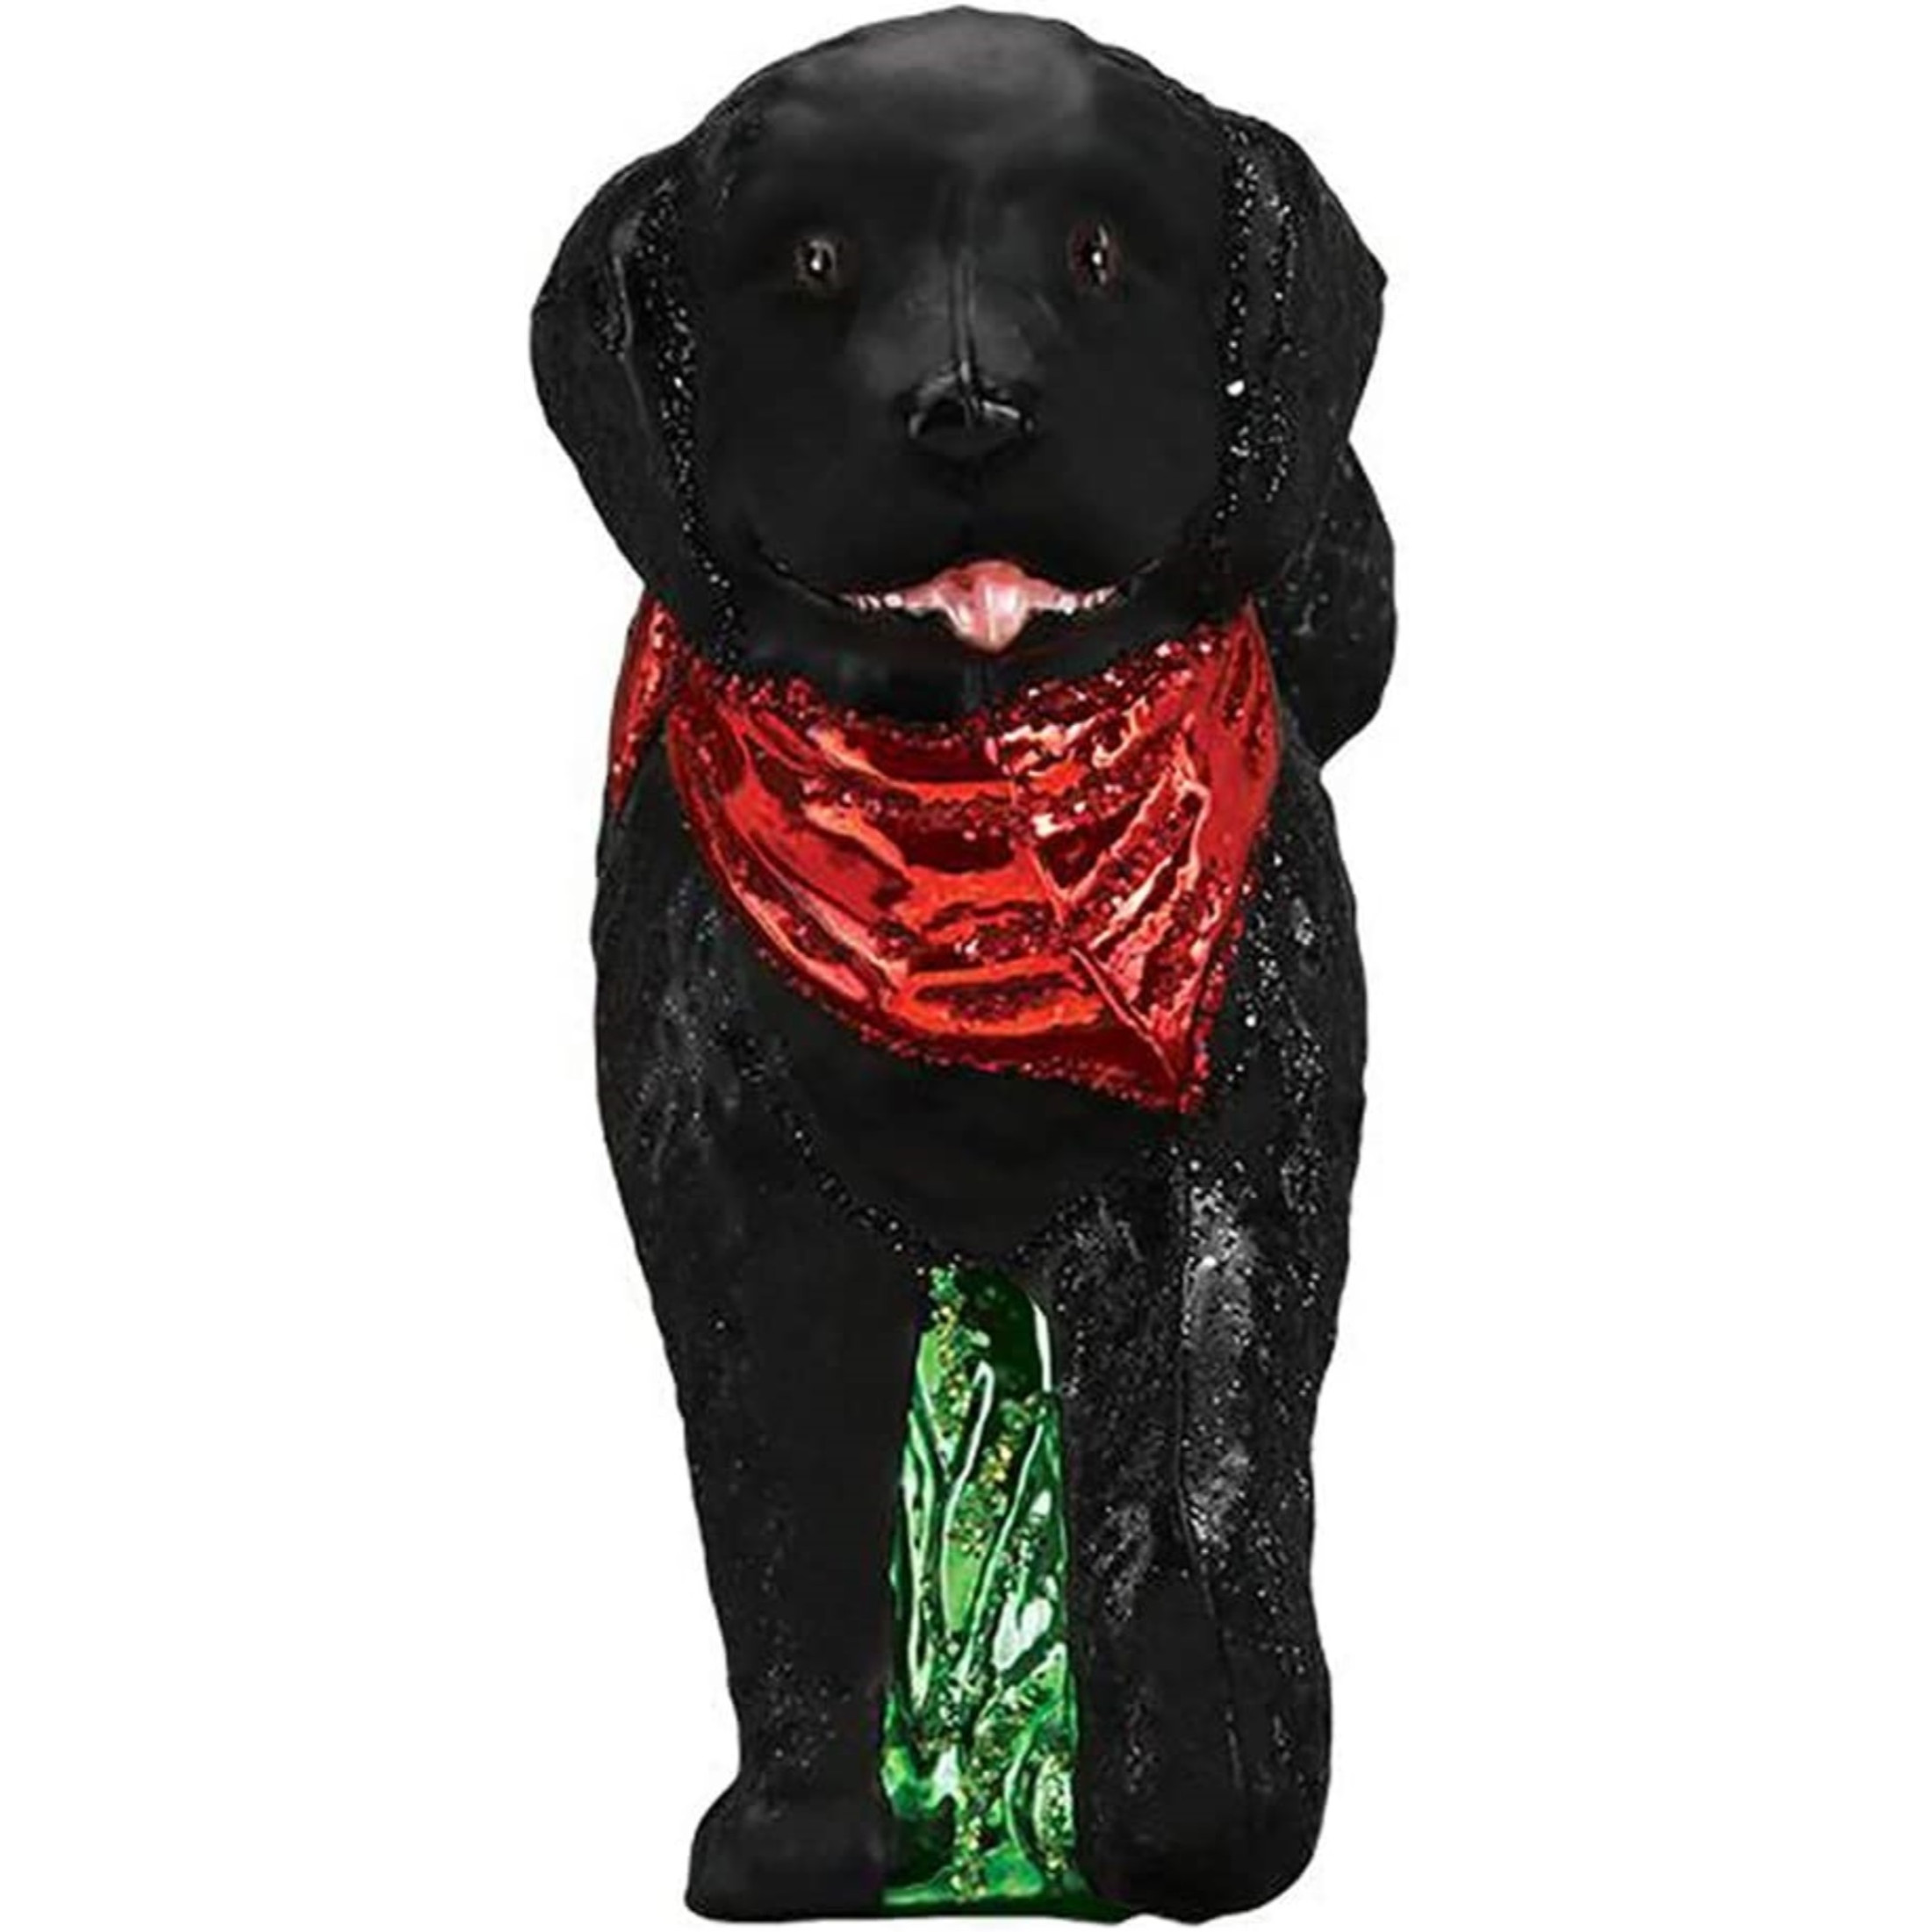 Old World Christmas Glass Blown Ornament, Black Doodle Dog (With OWC Gift Box)